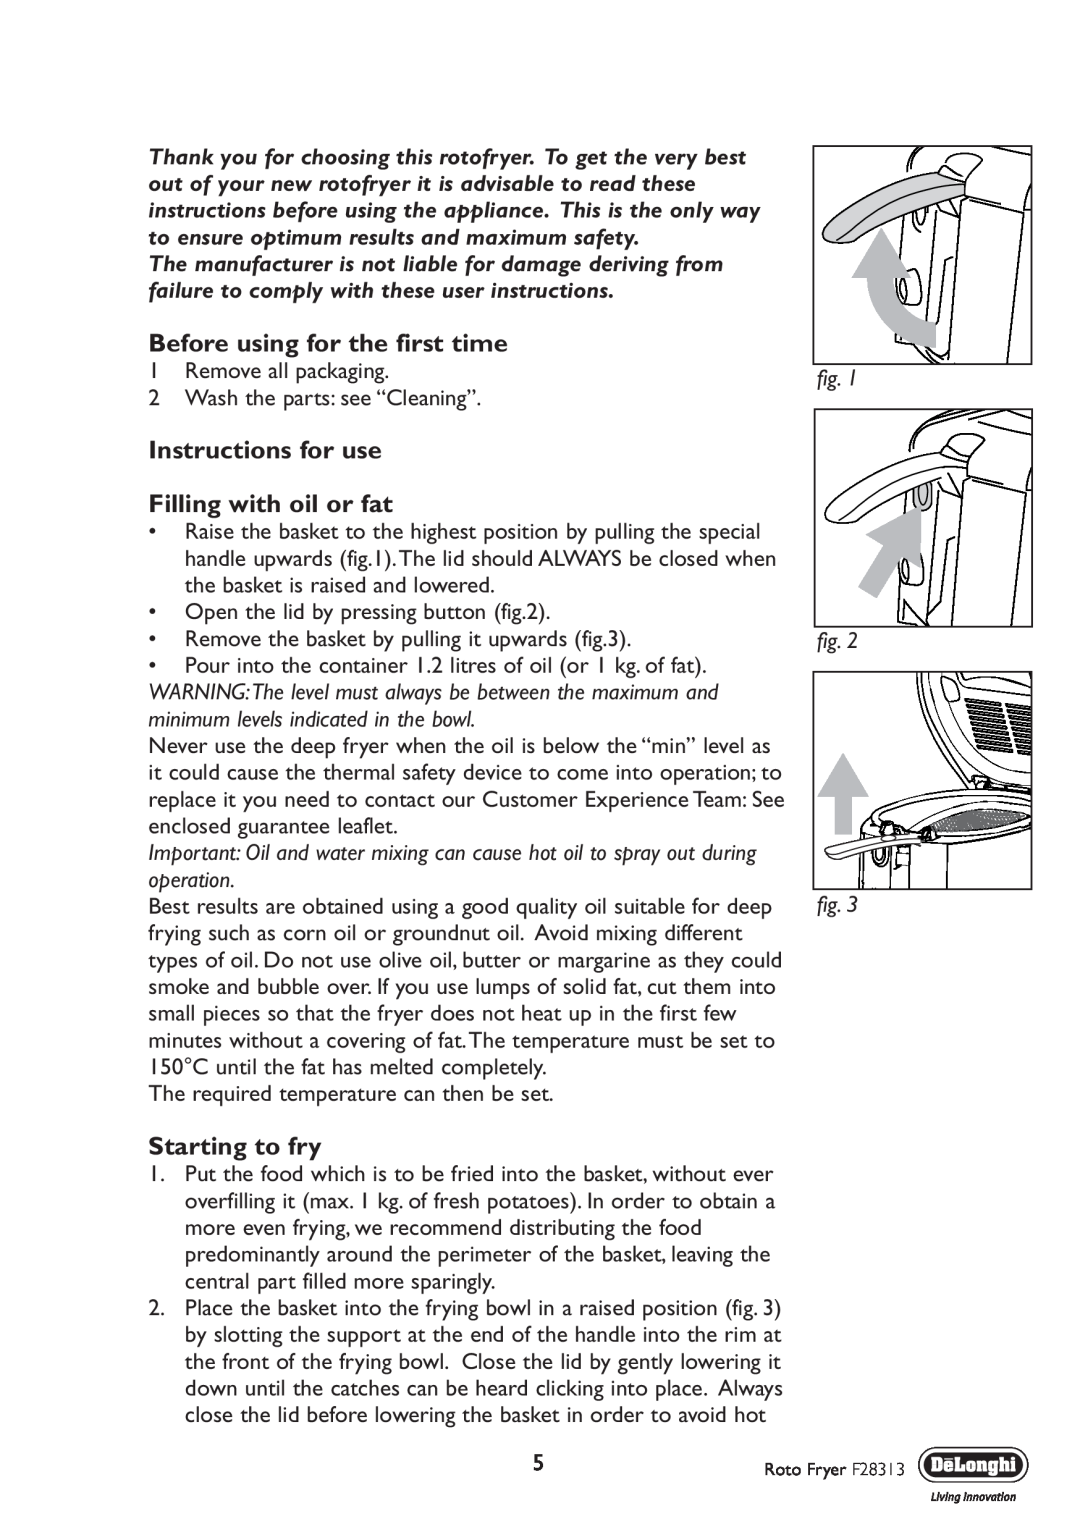 DeLonghi F28313 manual Before using for the first time, Instructions for use Filling with oil or fat, Starting to fry 